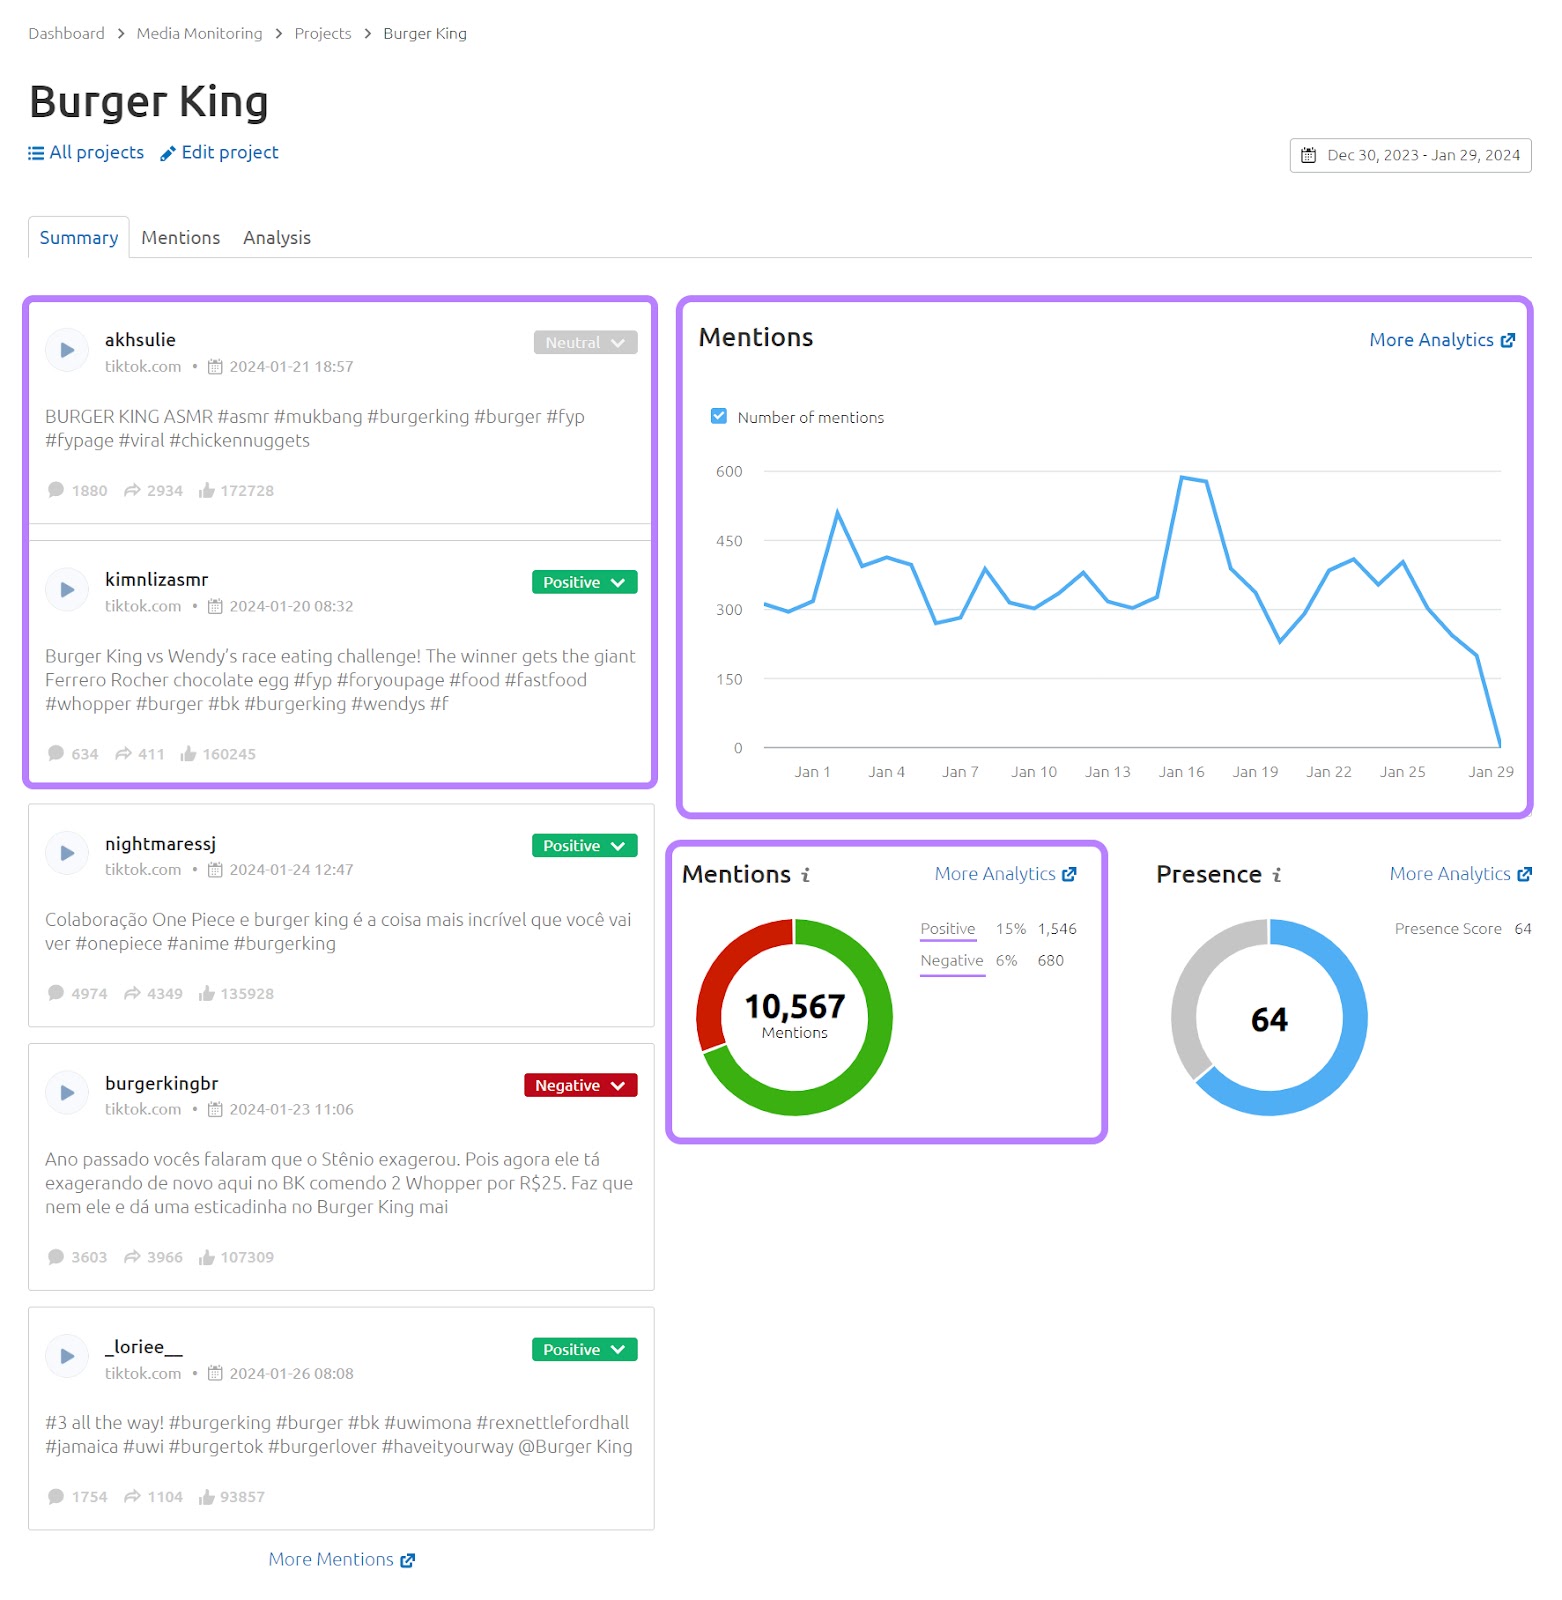 A summary dashboard for Burger King in Media Monitoring app